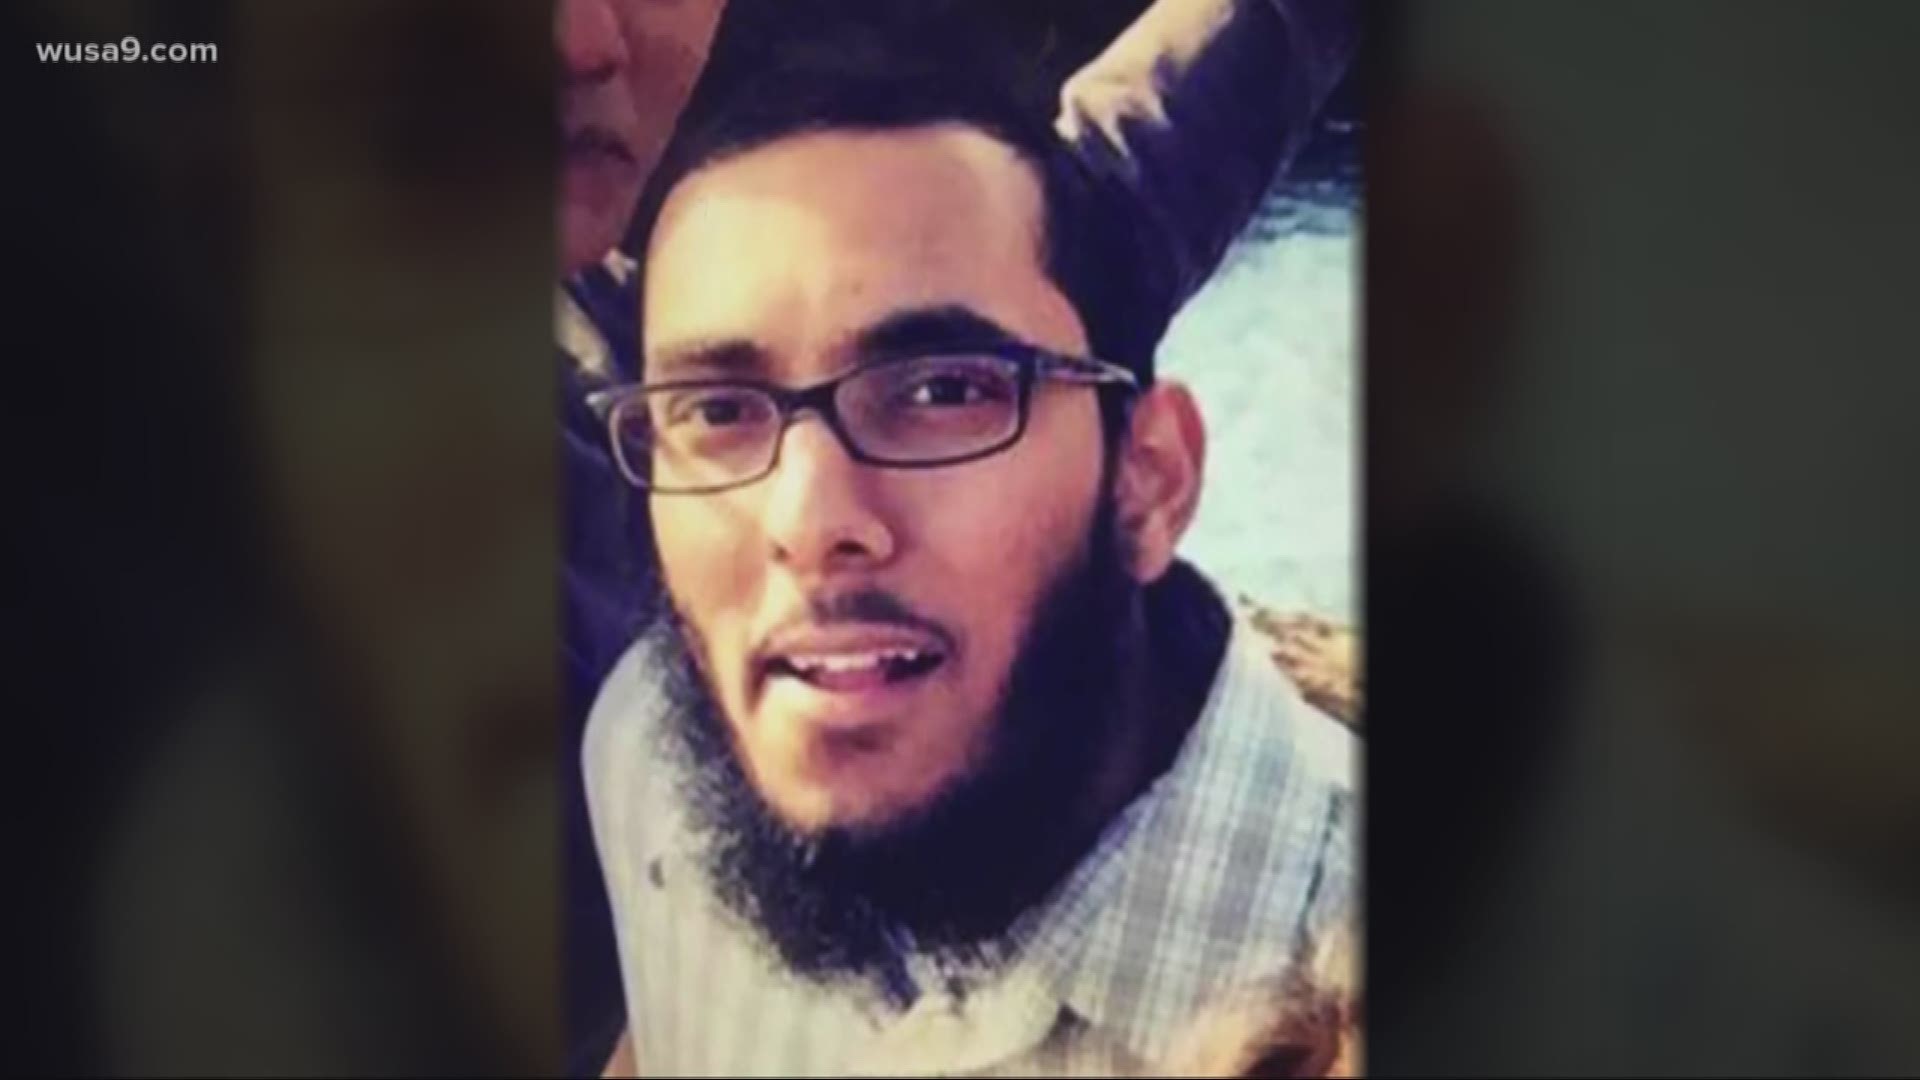 Rondell Henry confessed to plotting a truck attack at National Harbor this spring. Well now, federal prosecutors in Maryland just upped the charges. They now say he was acting in support of ISIS.